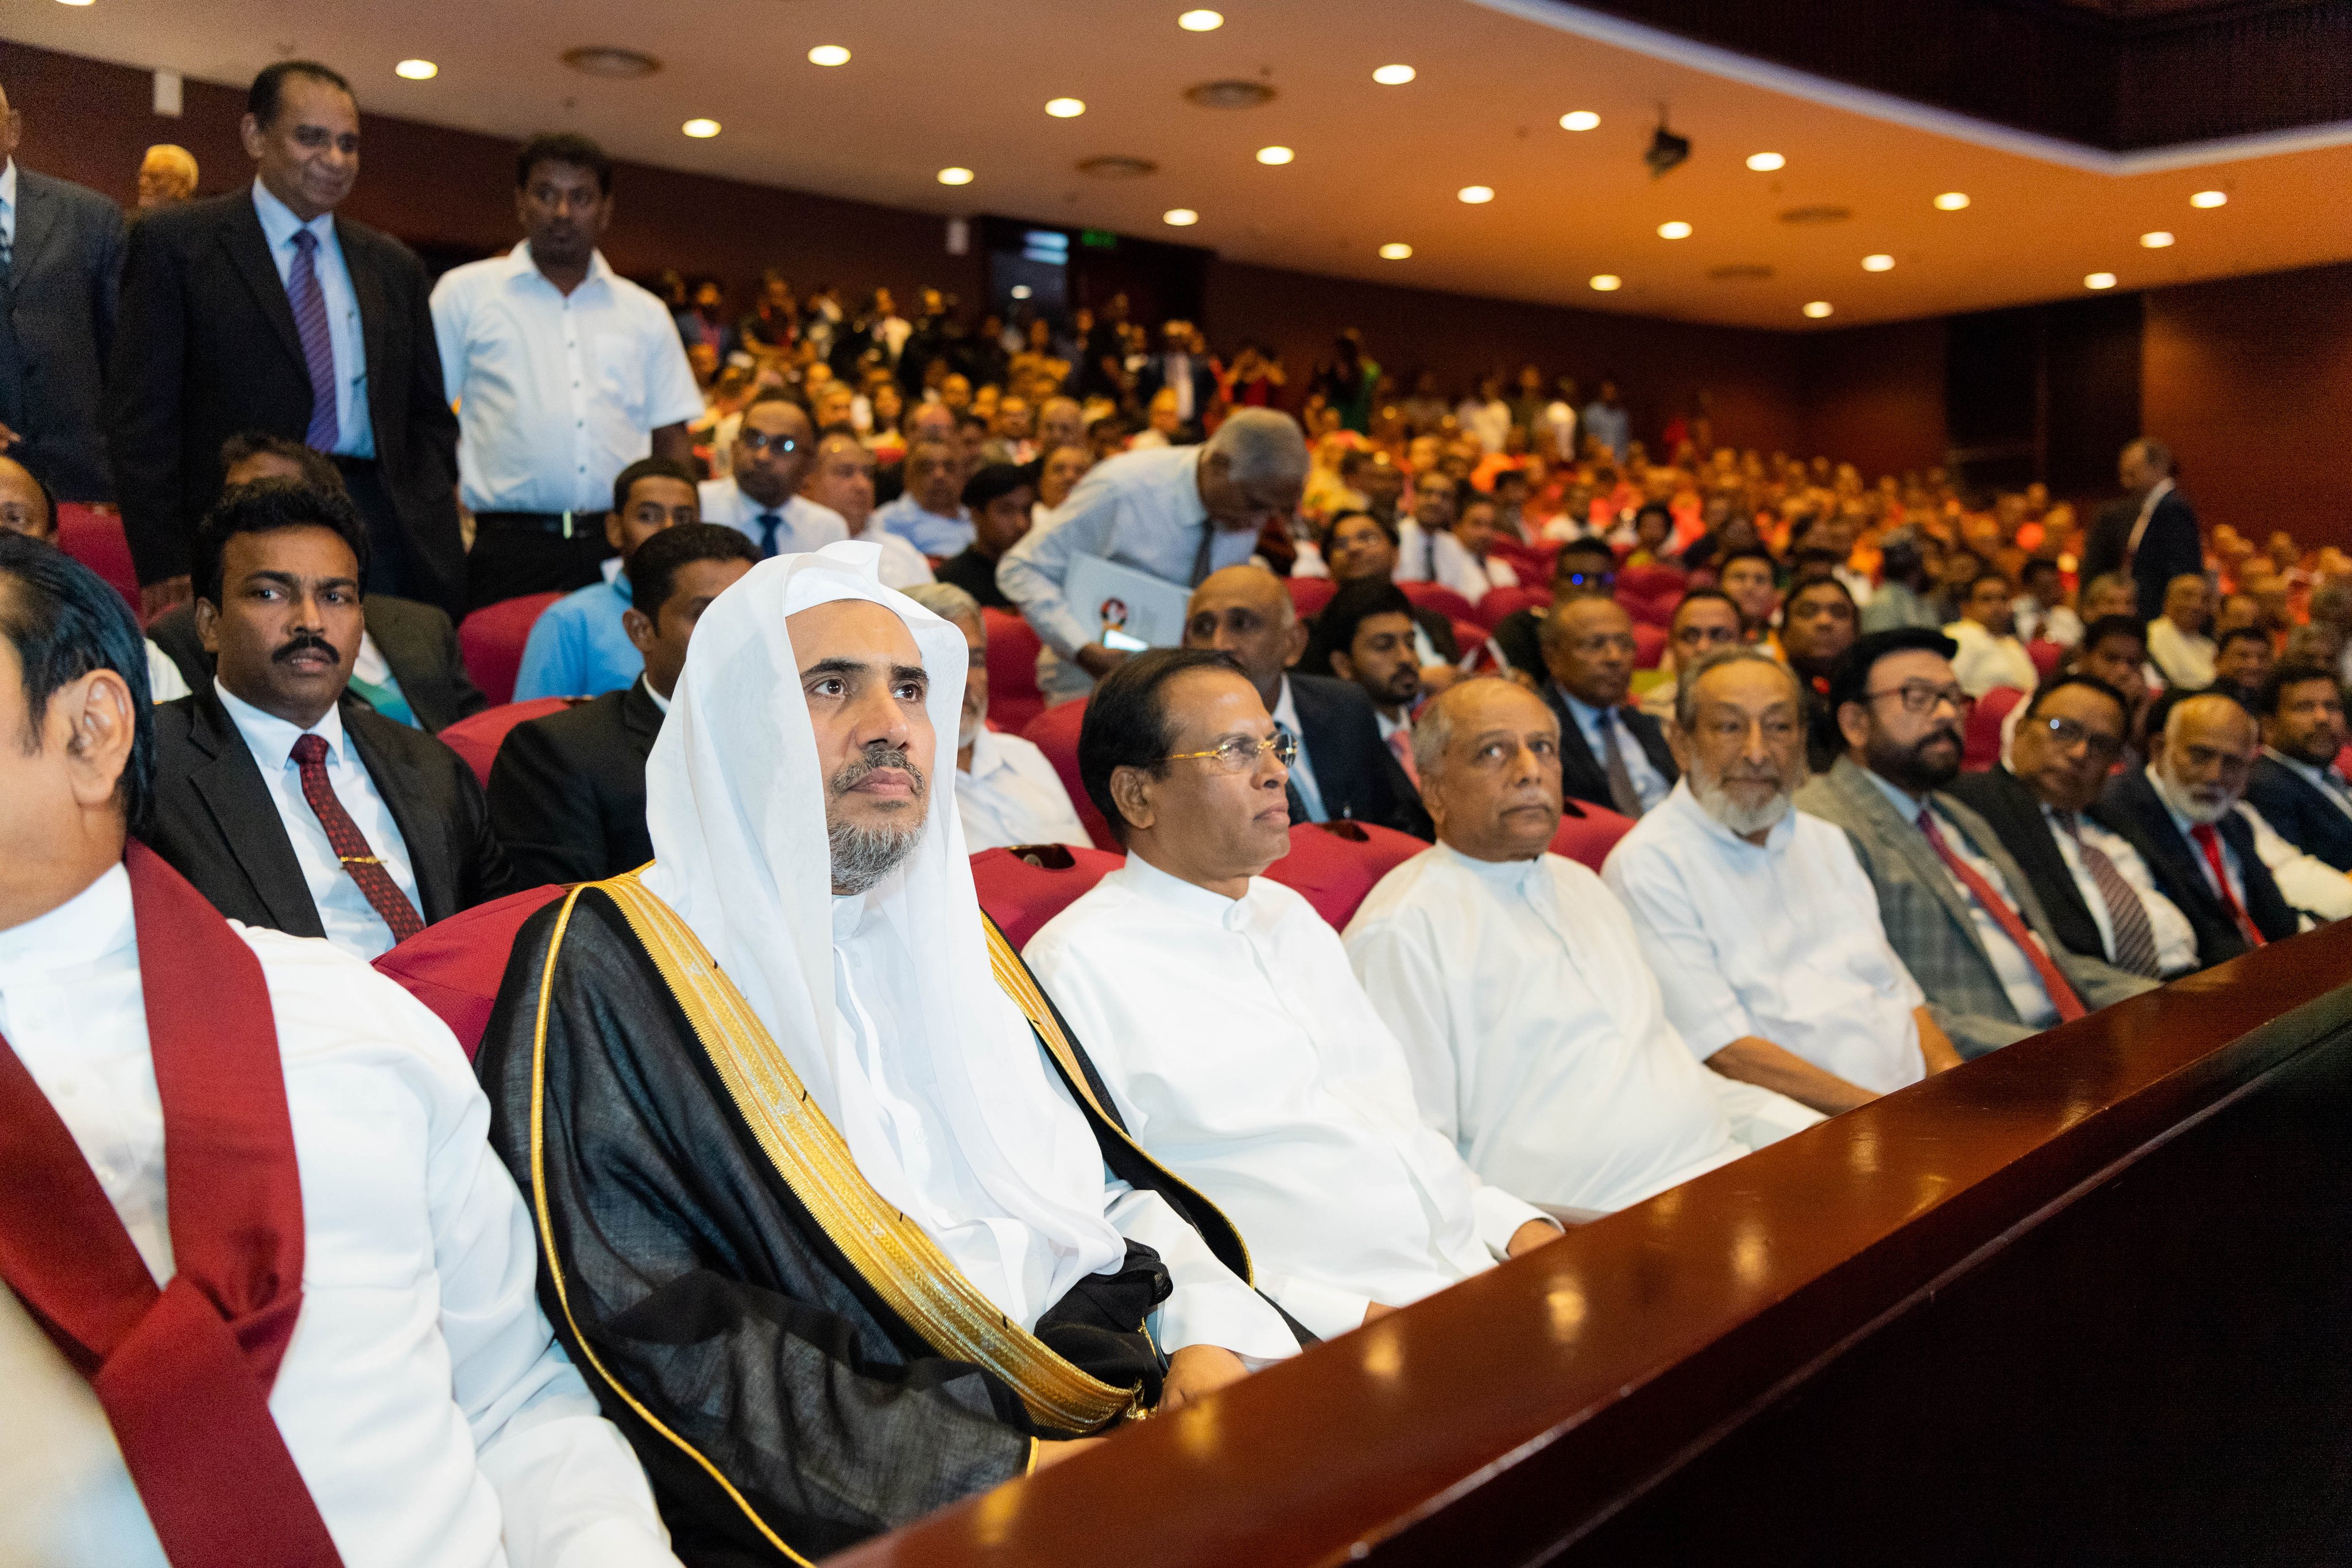 the MWL launched an interfaith summit, which featured more than 2,000 religious leaders, intellectuals, and politicians